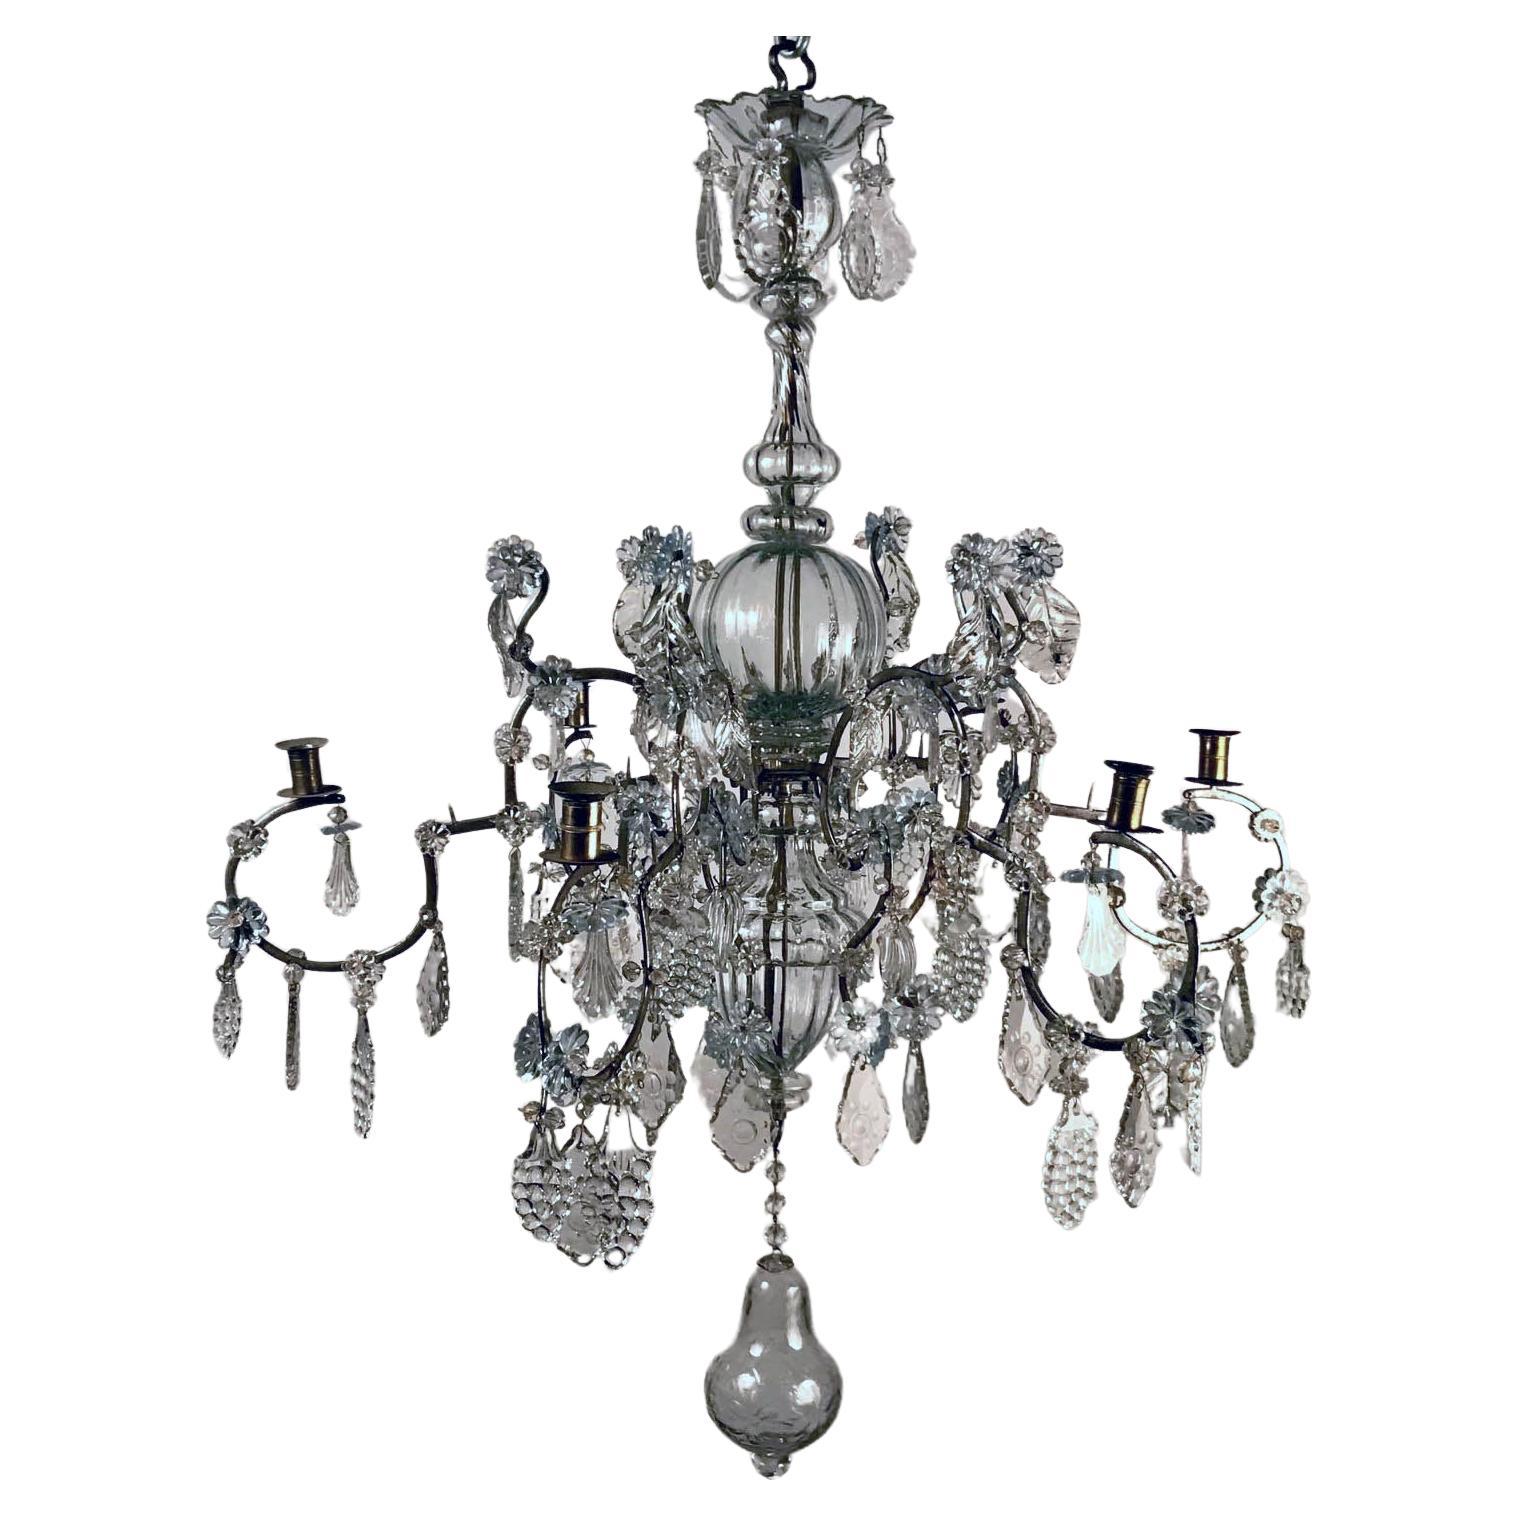 Baltic 18th Century Crystal and Iron Candle Chandelier For Sale